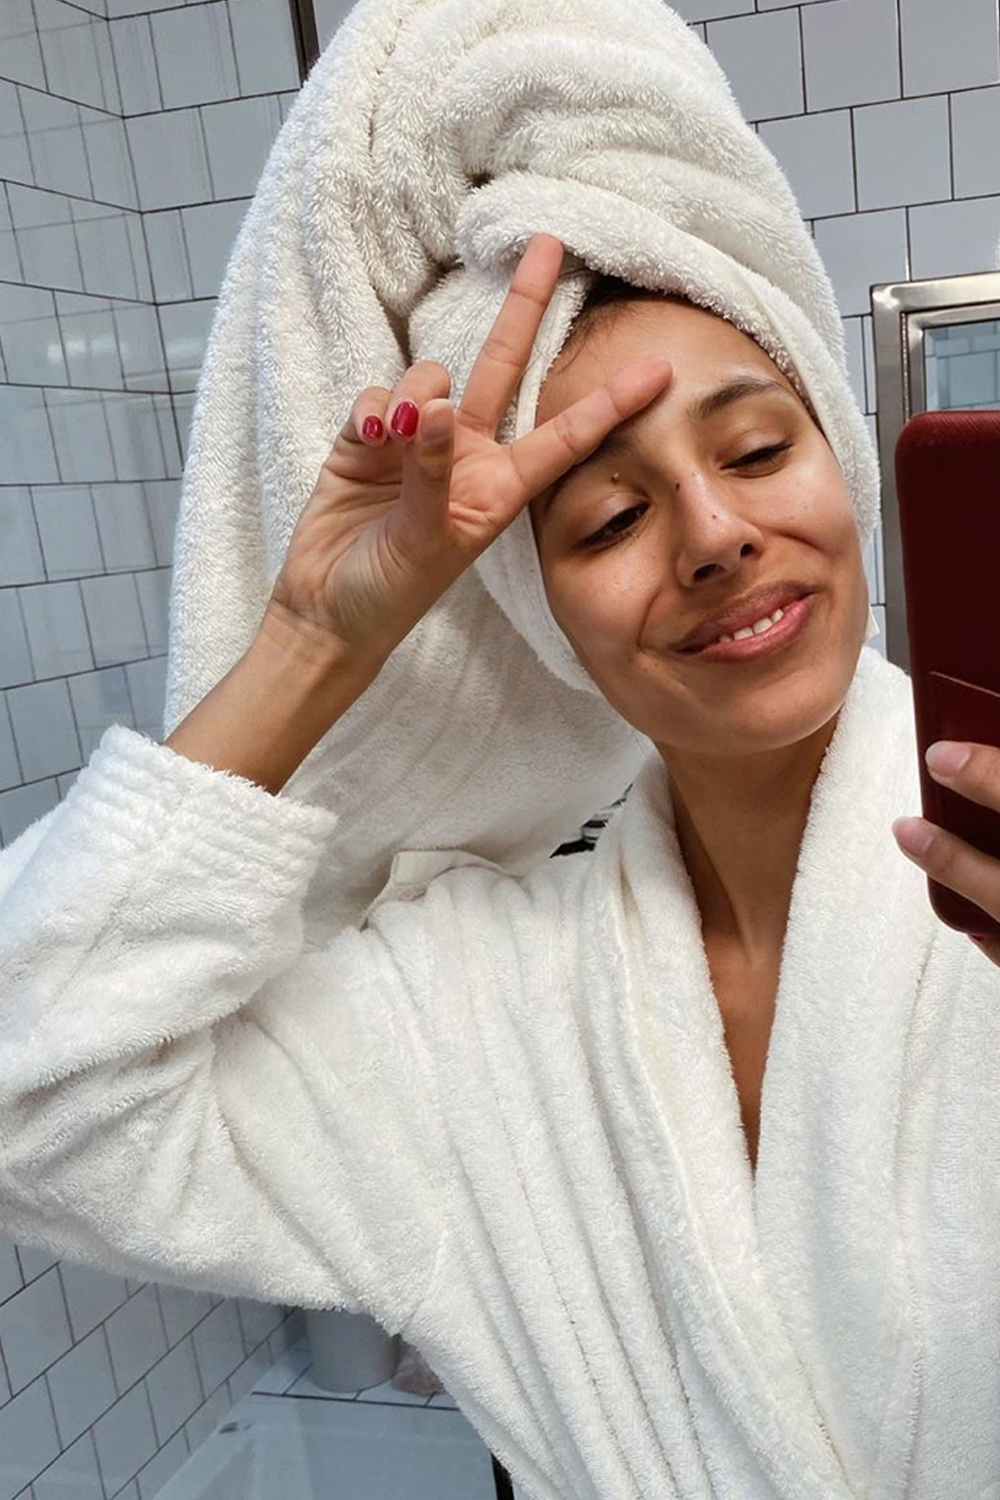 Boost Your Self-Care Routine With These 12 Stress-Relieving Products